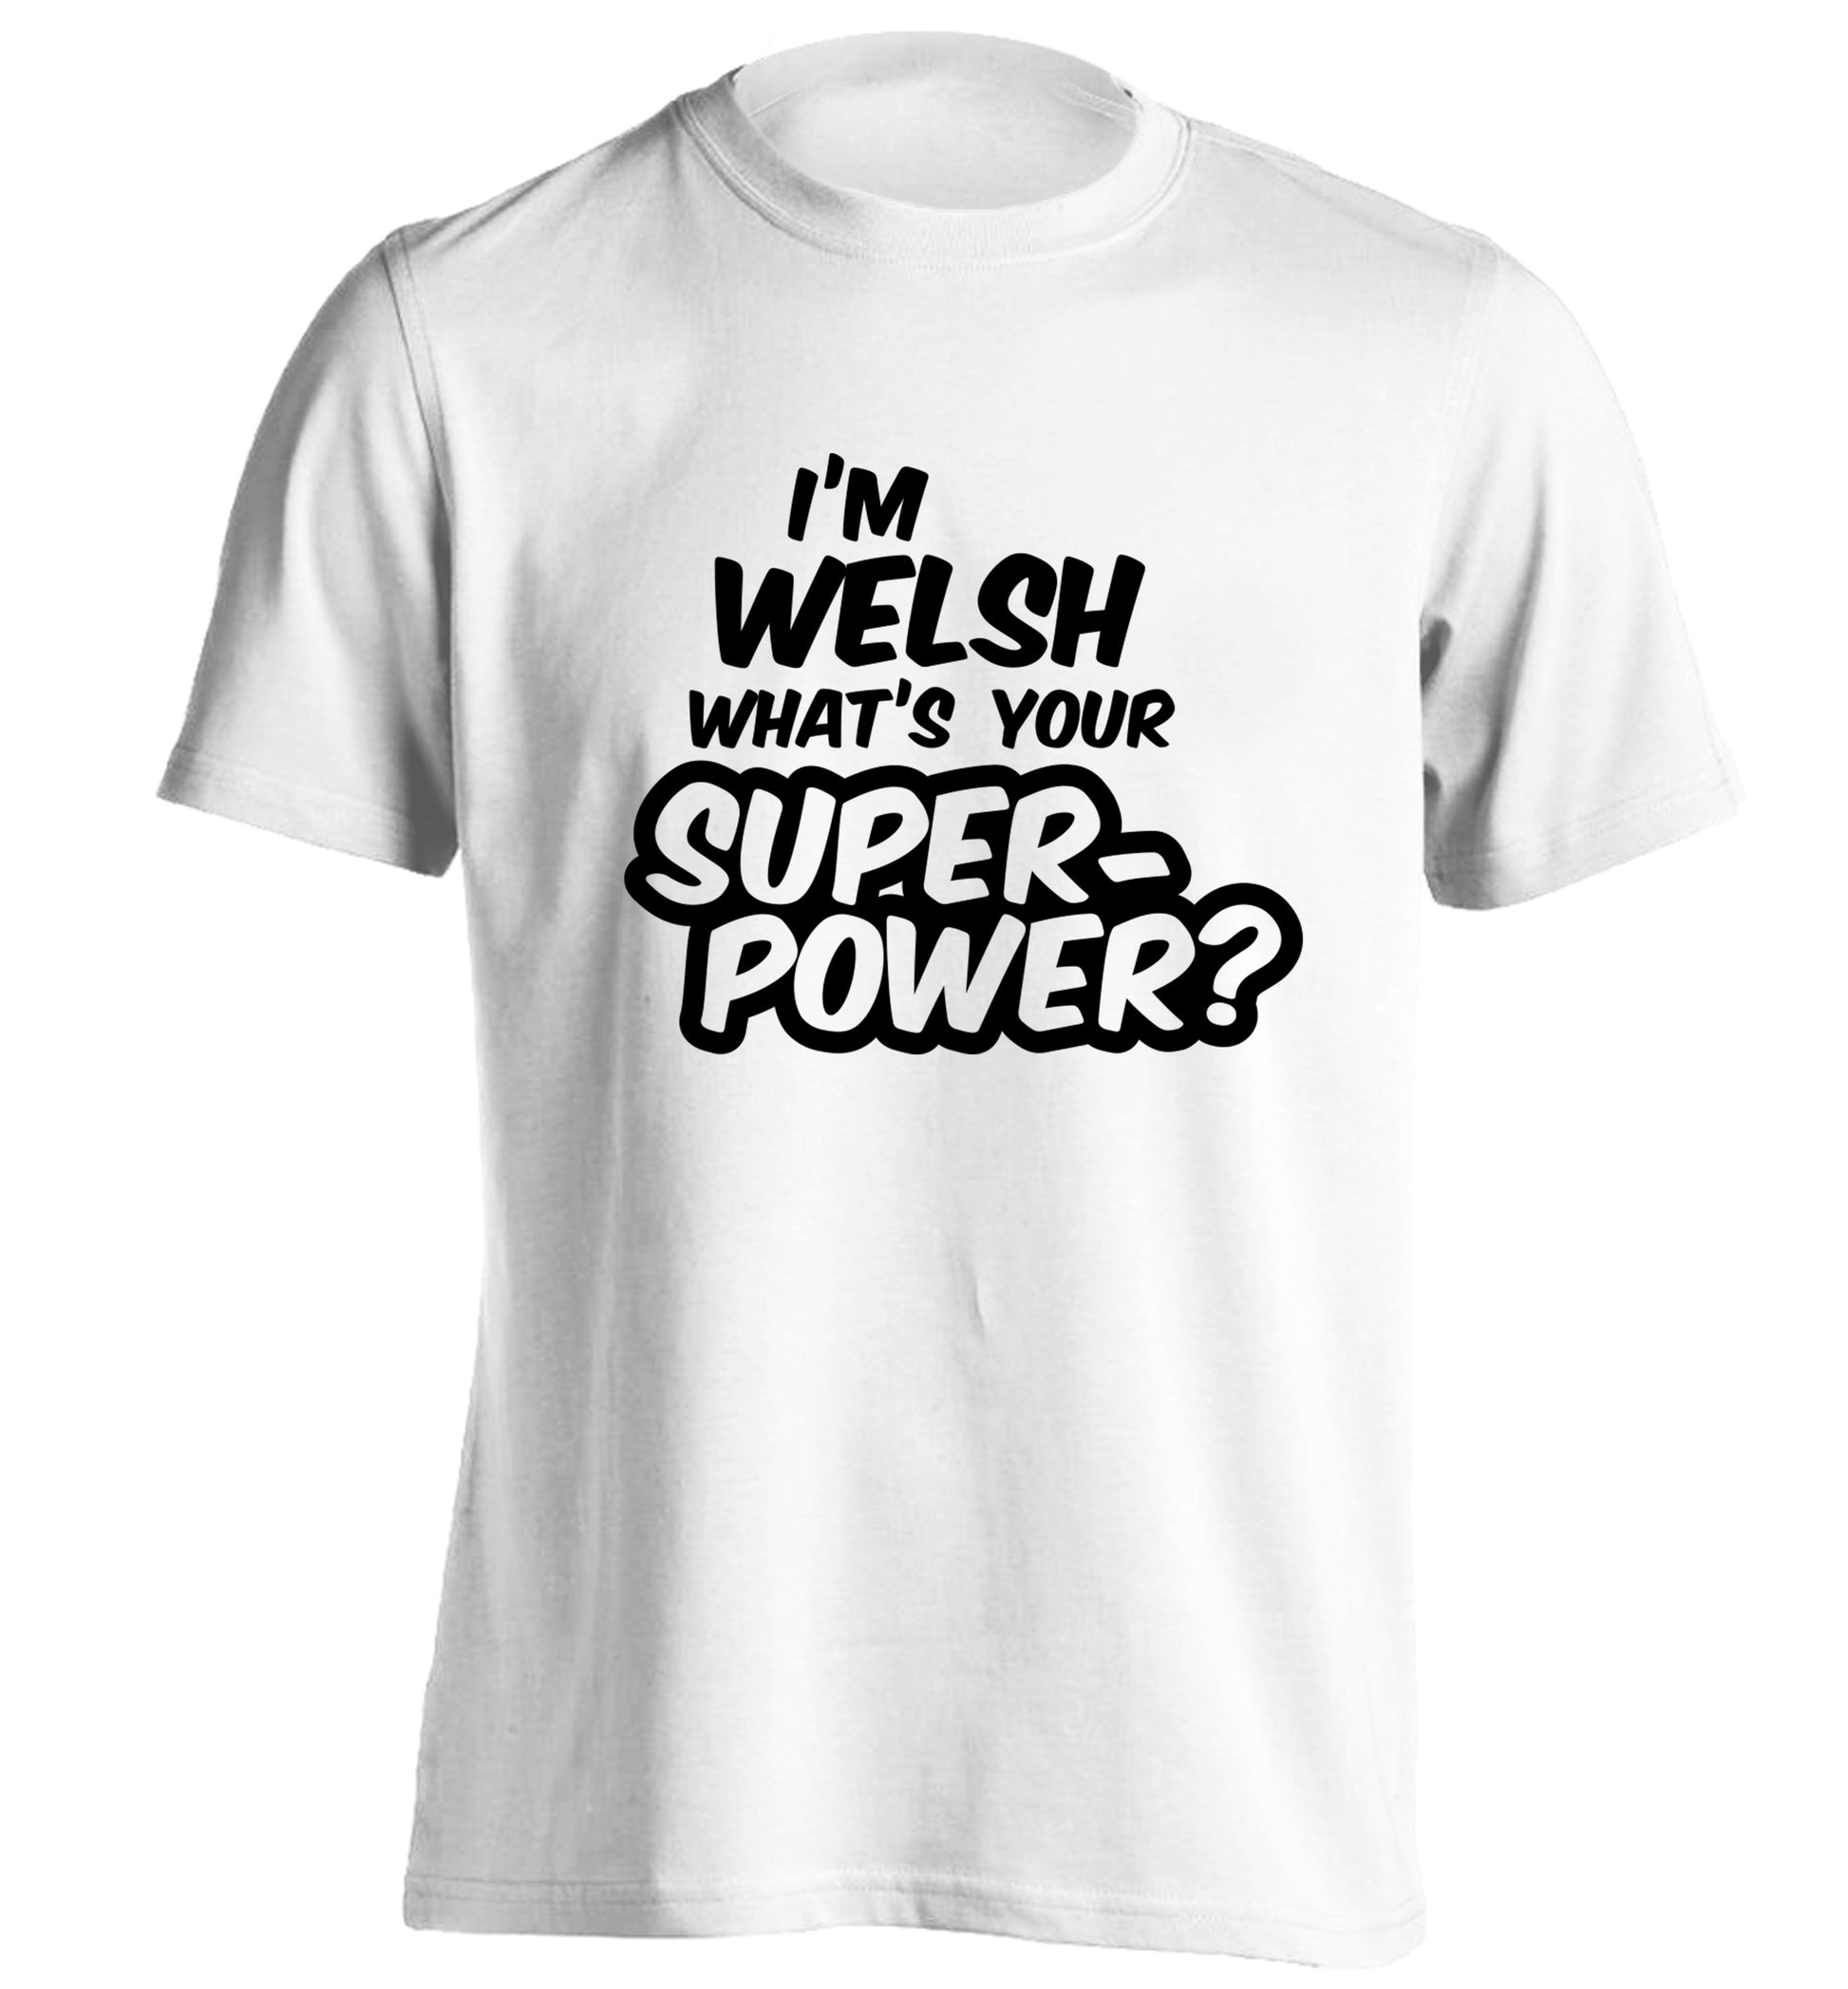 I'm Welsh what's your superpower? adults unisex white Tshirt 2XL